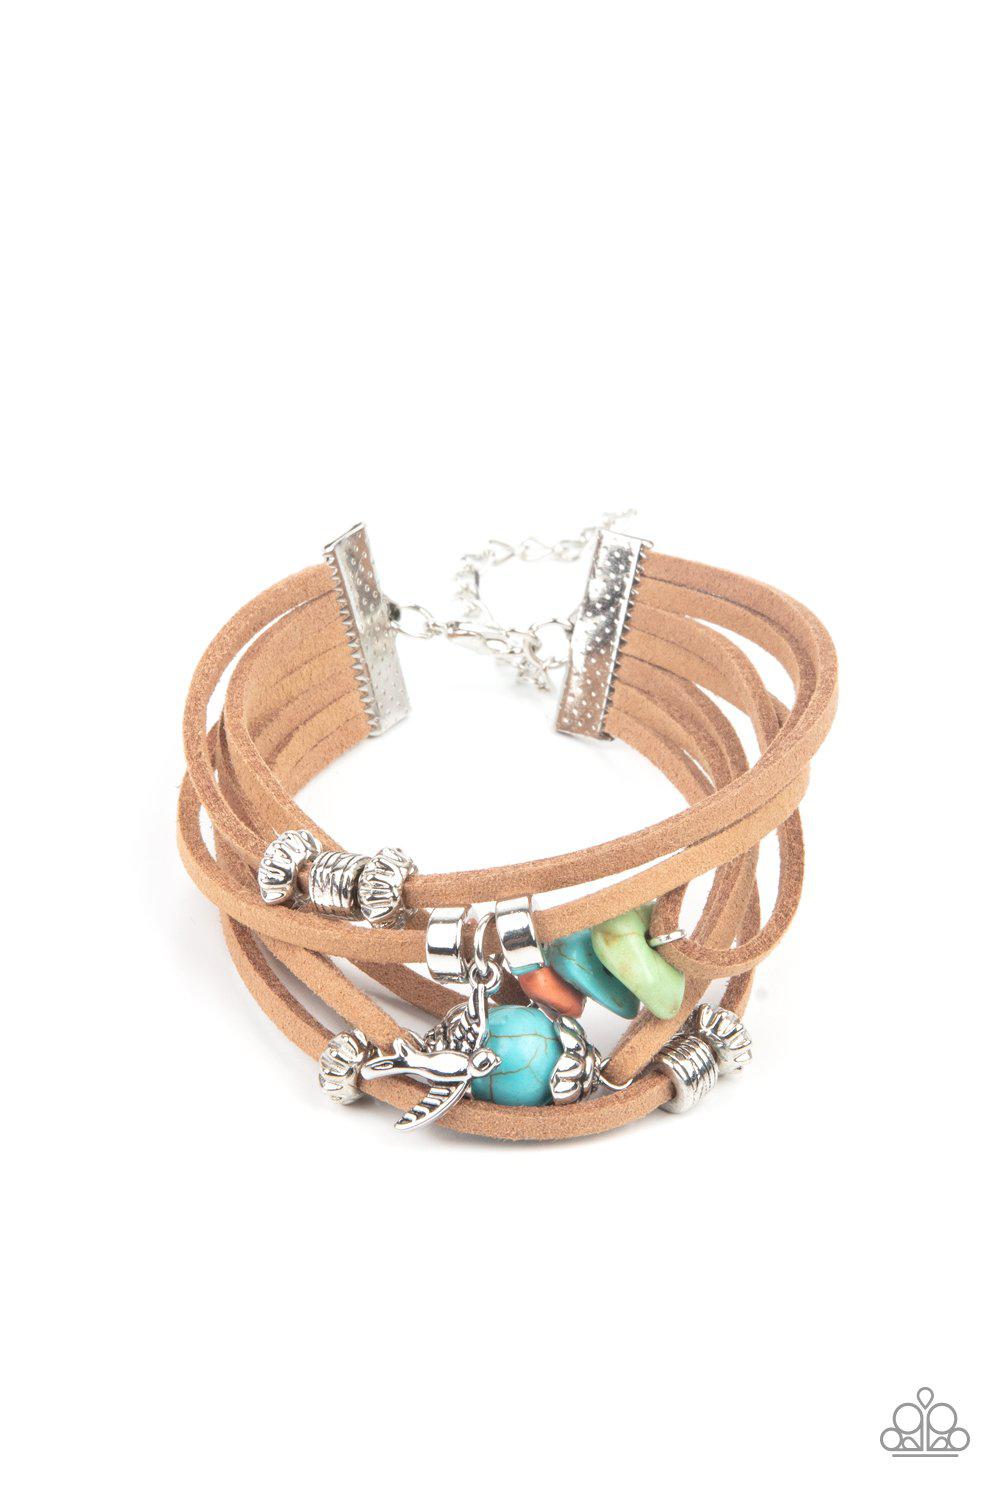 Canyon Flight Multi Stone and Suede Bracelet - Paparazzi Accessories- lightbox - CarasShop.com - $5 Jewelry by Cara Jewels